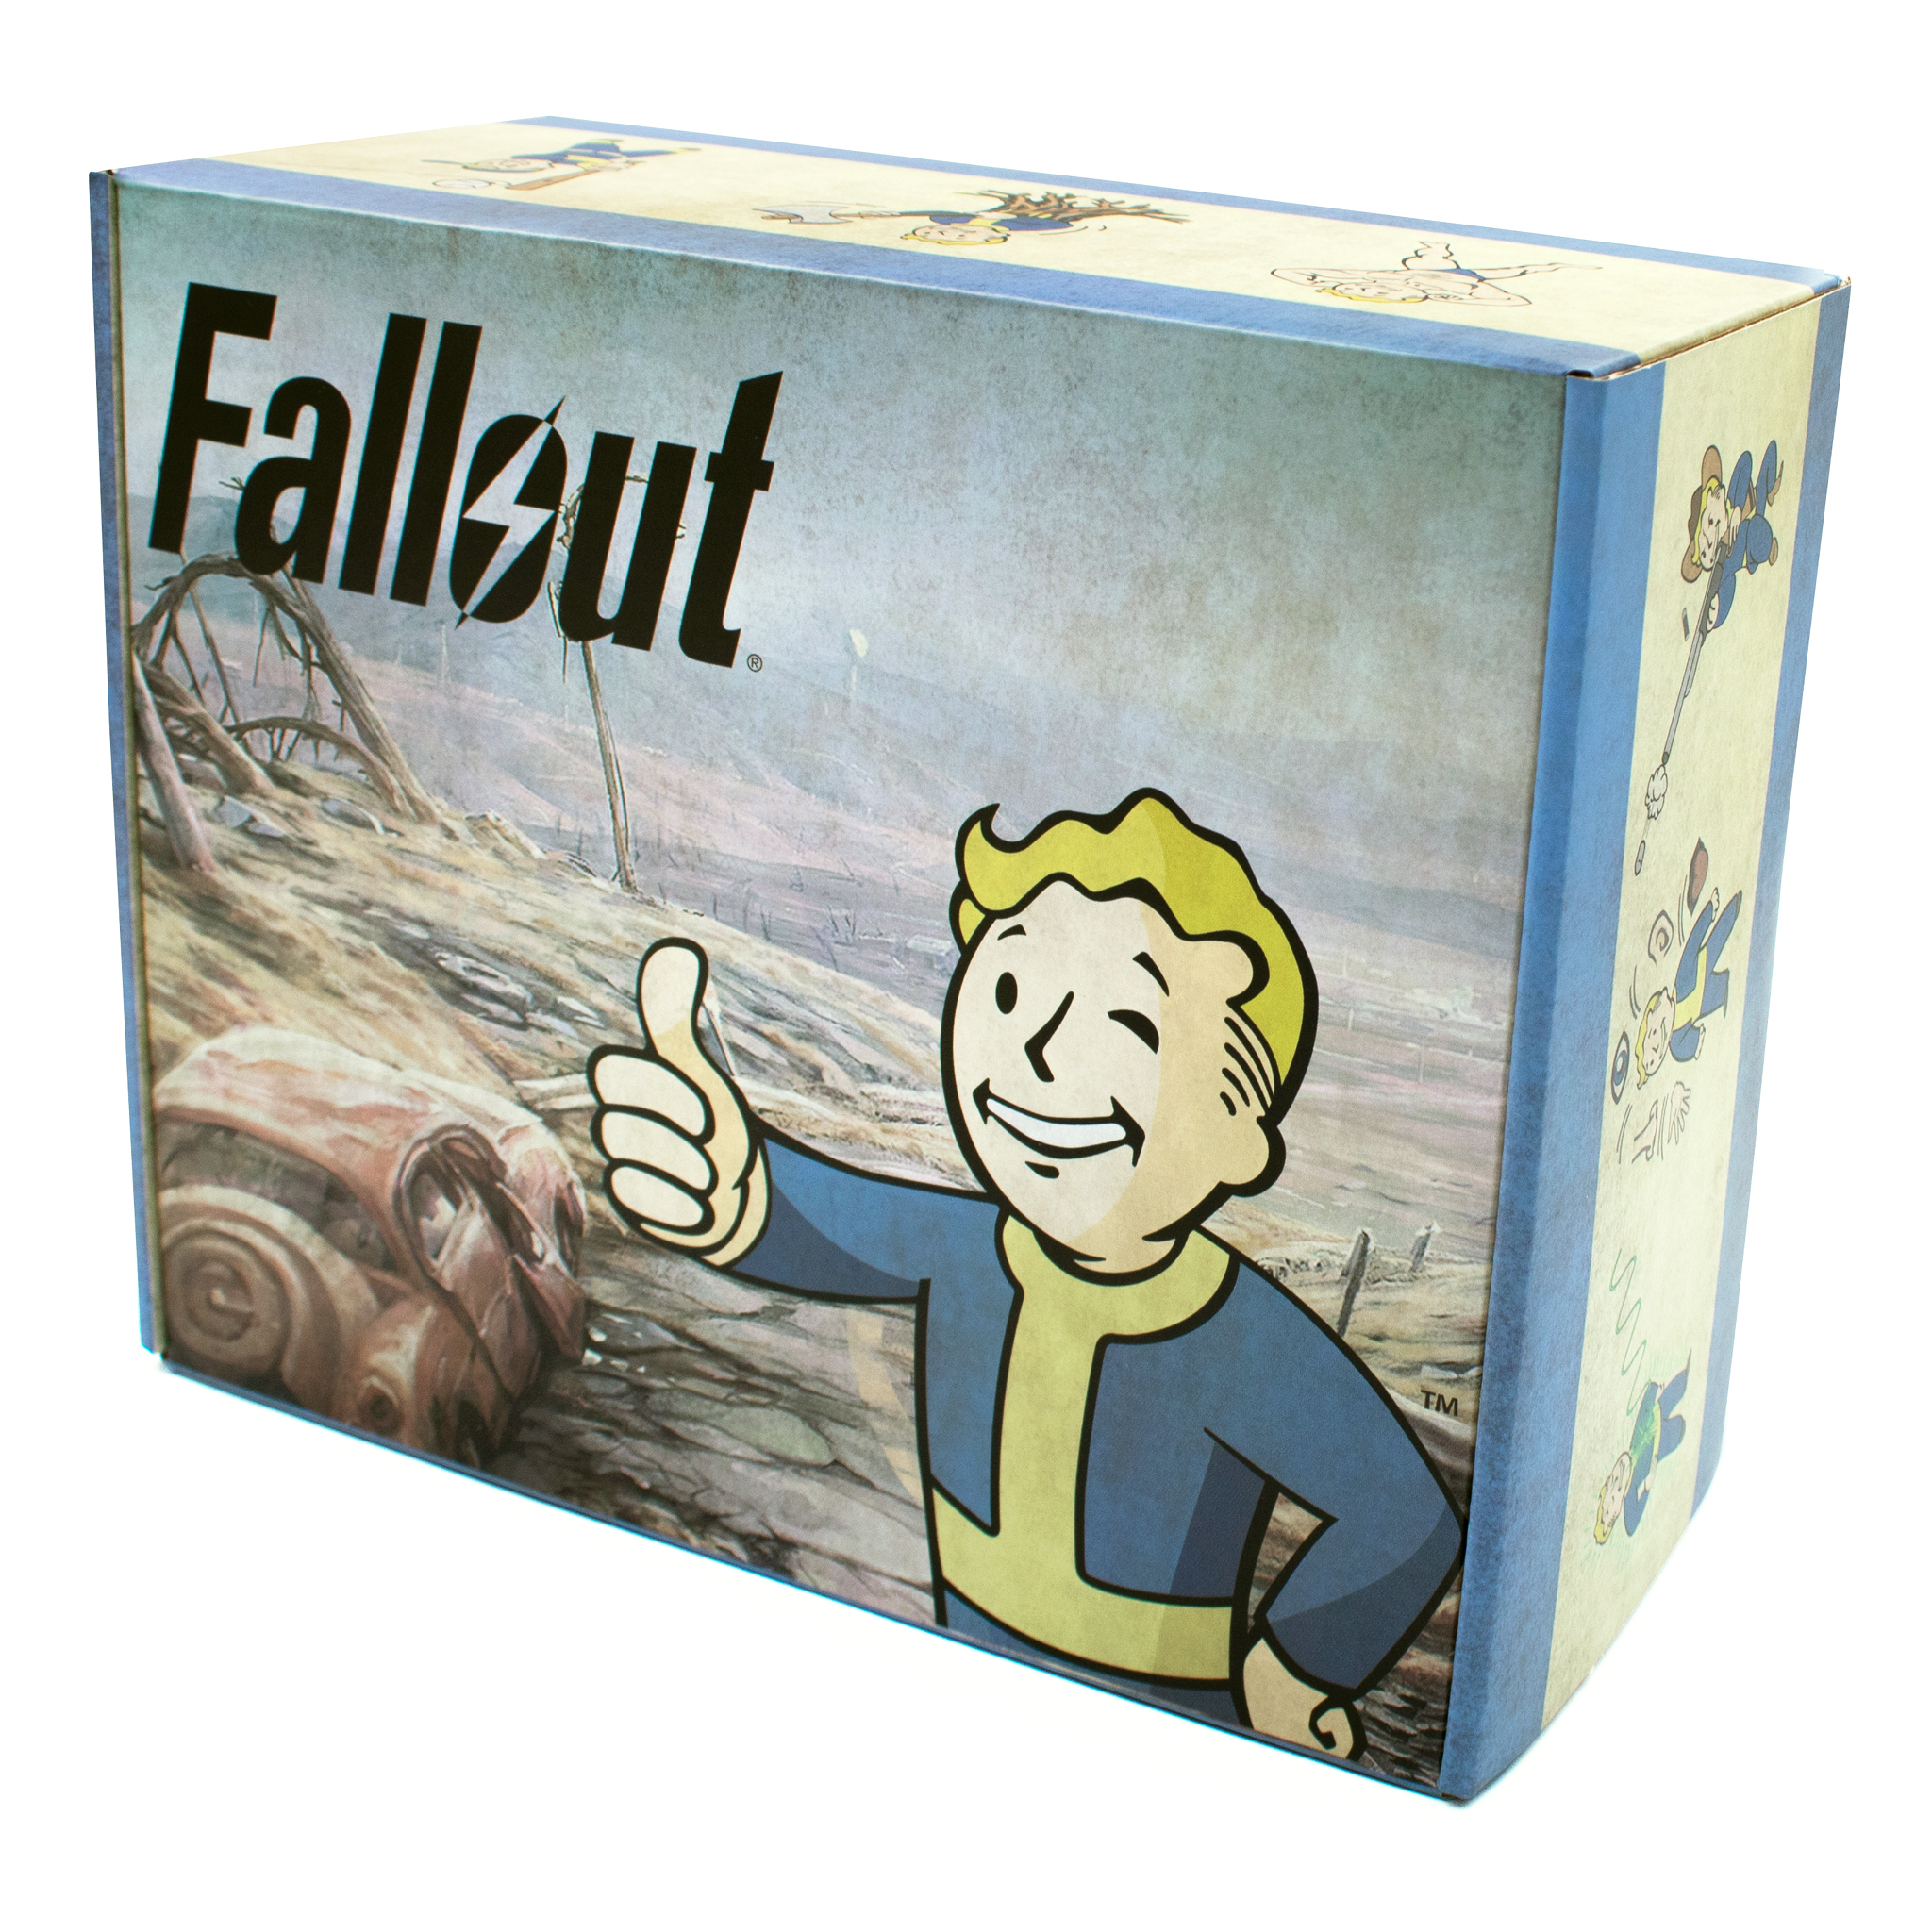 CultureFly Fallout Collectible Box - image 4 of 8